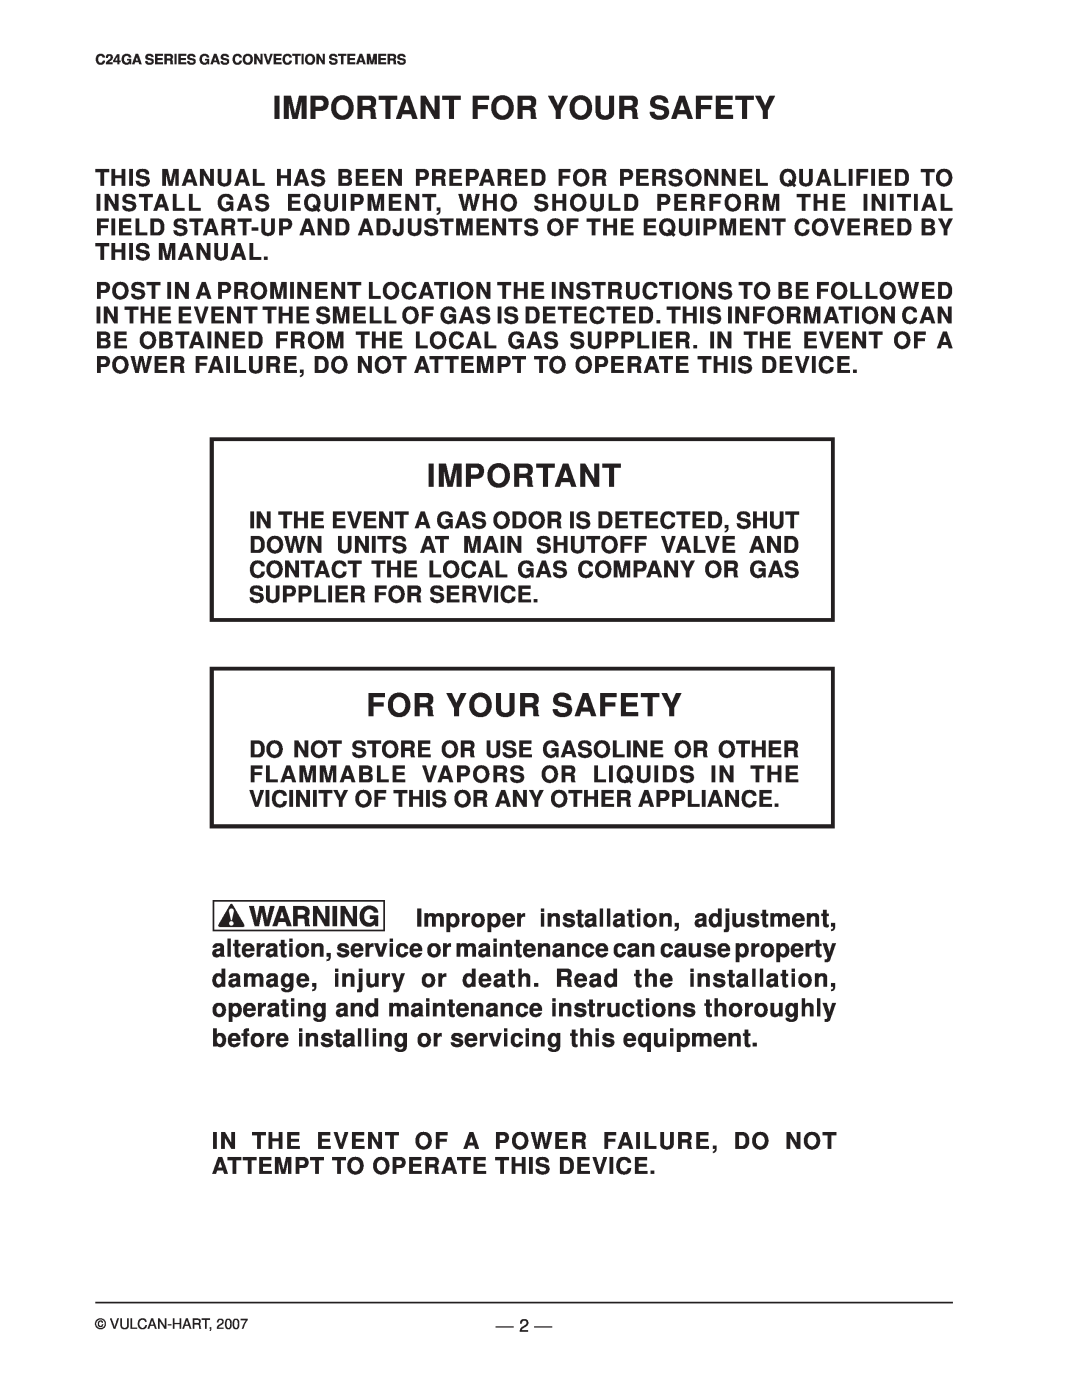 Vulcan-Hart ML-136057, ML-136056 operation manual Important For Your Safety 